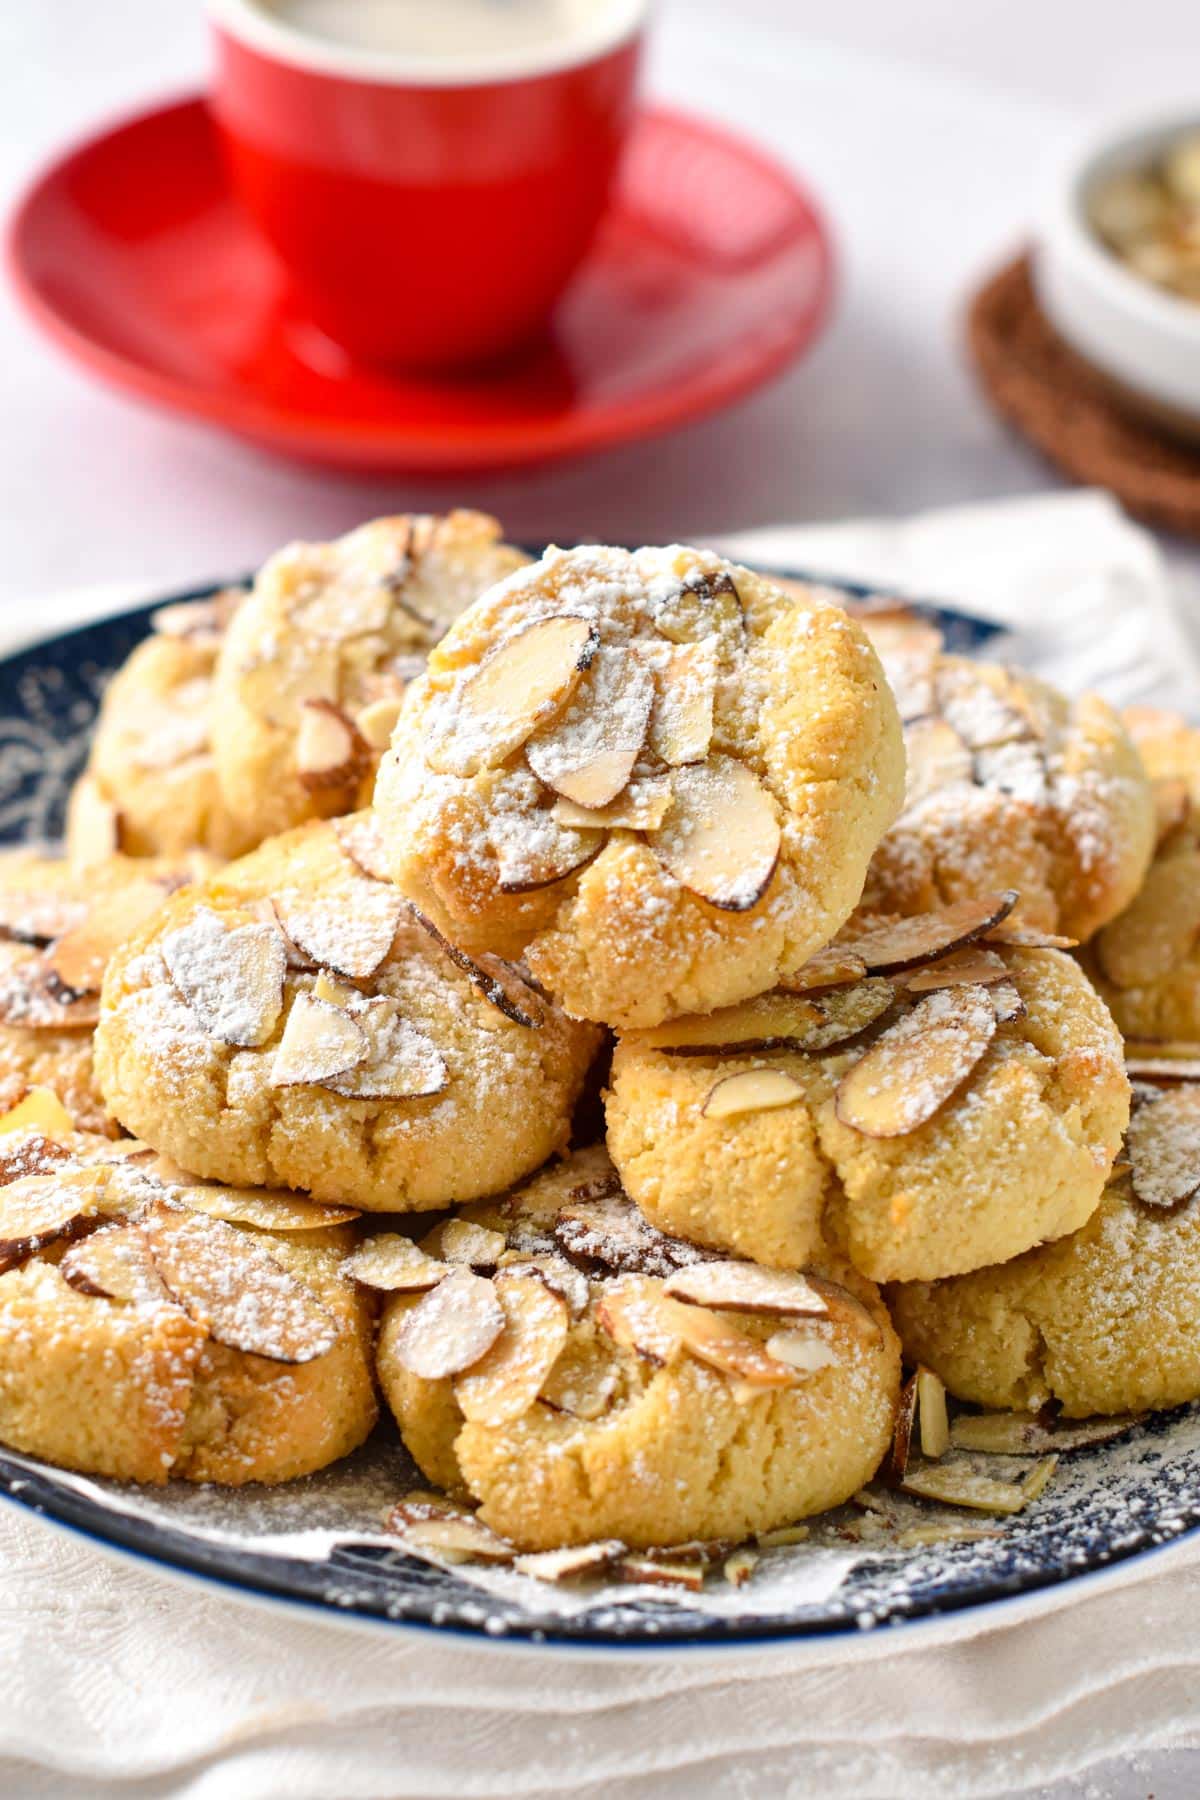 These Greek Almond Cookies are easy melt in your mouth almond flour cookies coated with crunchy toasted sliced almonds. Plus, these are also naturally gluten-free with keto friendly option.These Greek Almond Cookies are easy melt in your mouth almond flour cookies coated with crunchy toasted sliced almonds. Plus, these are also naturally gluten-free with keto friendly option.